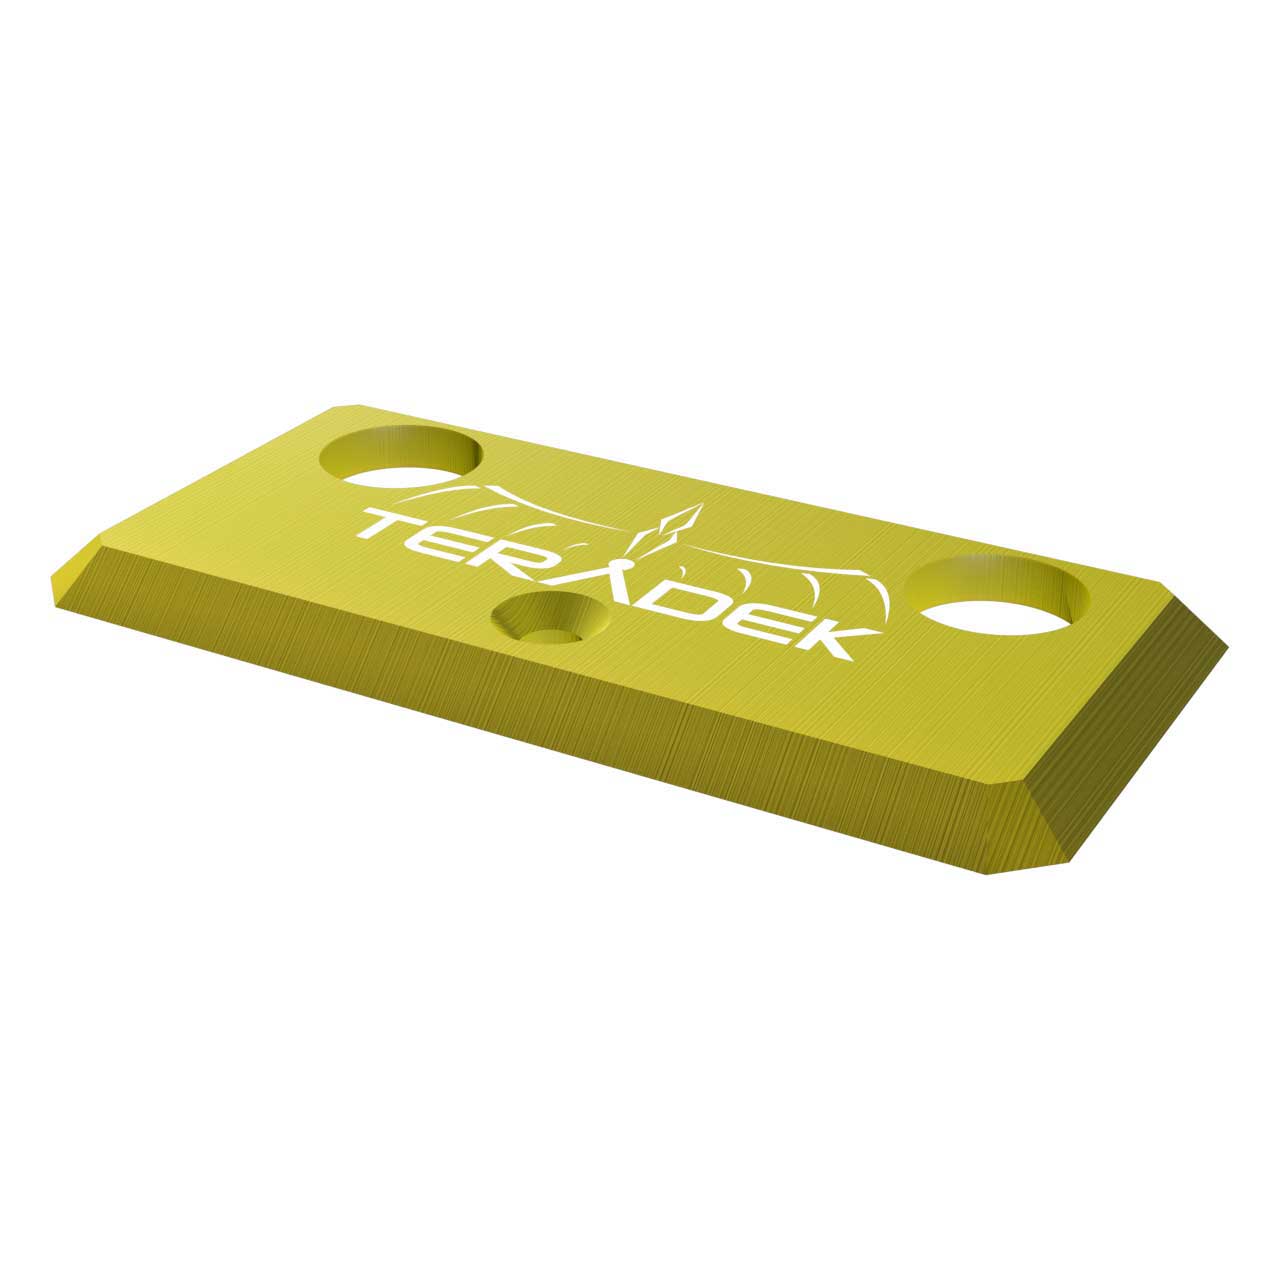 Teradek 11-0780-1 Bolt Accessory Identification Color Plates for Bolt 1000/3000 Transmitters & Receivers - Yellow  TER-11-0780-1